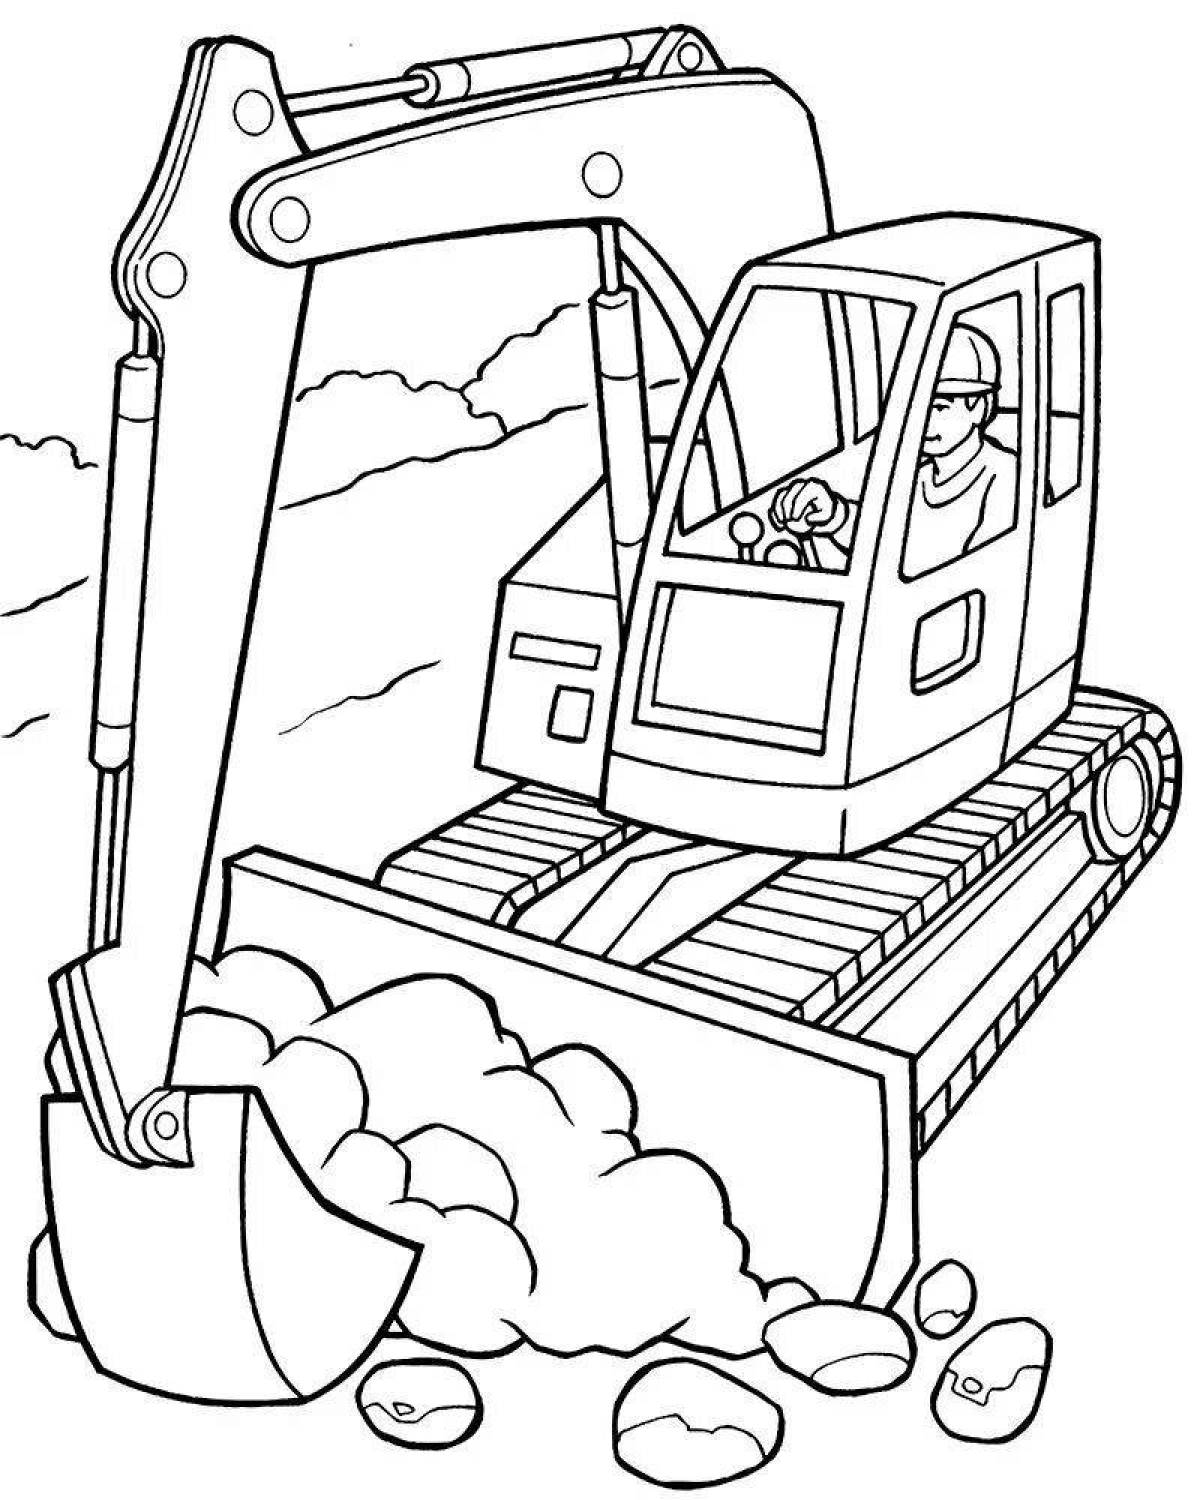 Coloring book dazzling snowplow for kids